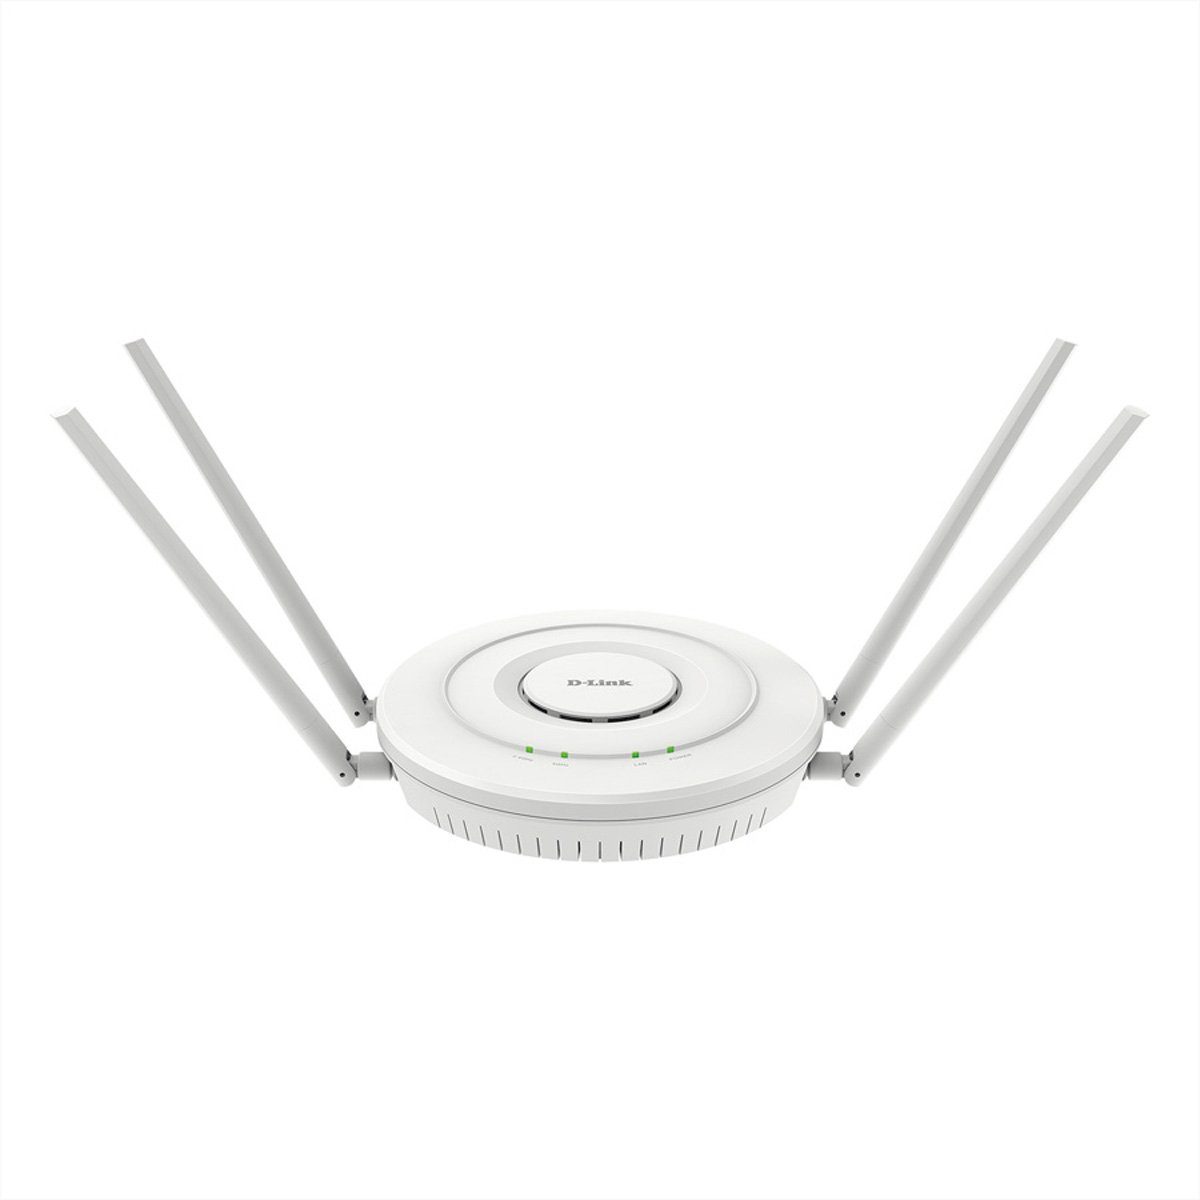 D-Link DWL-6610APE Dualband Access Point Unified AC1200 mit ext. Antennen WLAN-Repeater